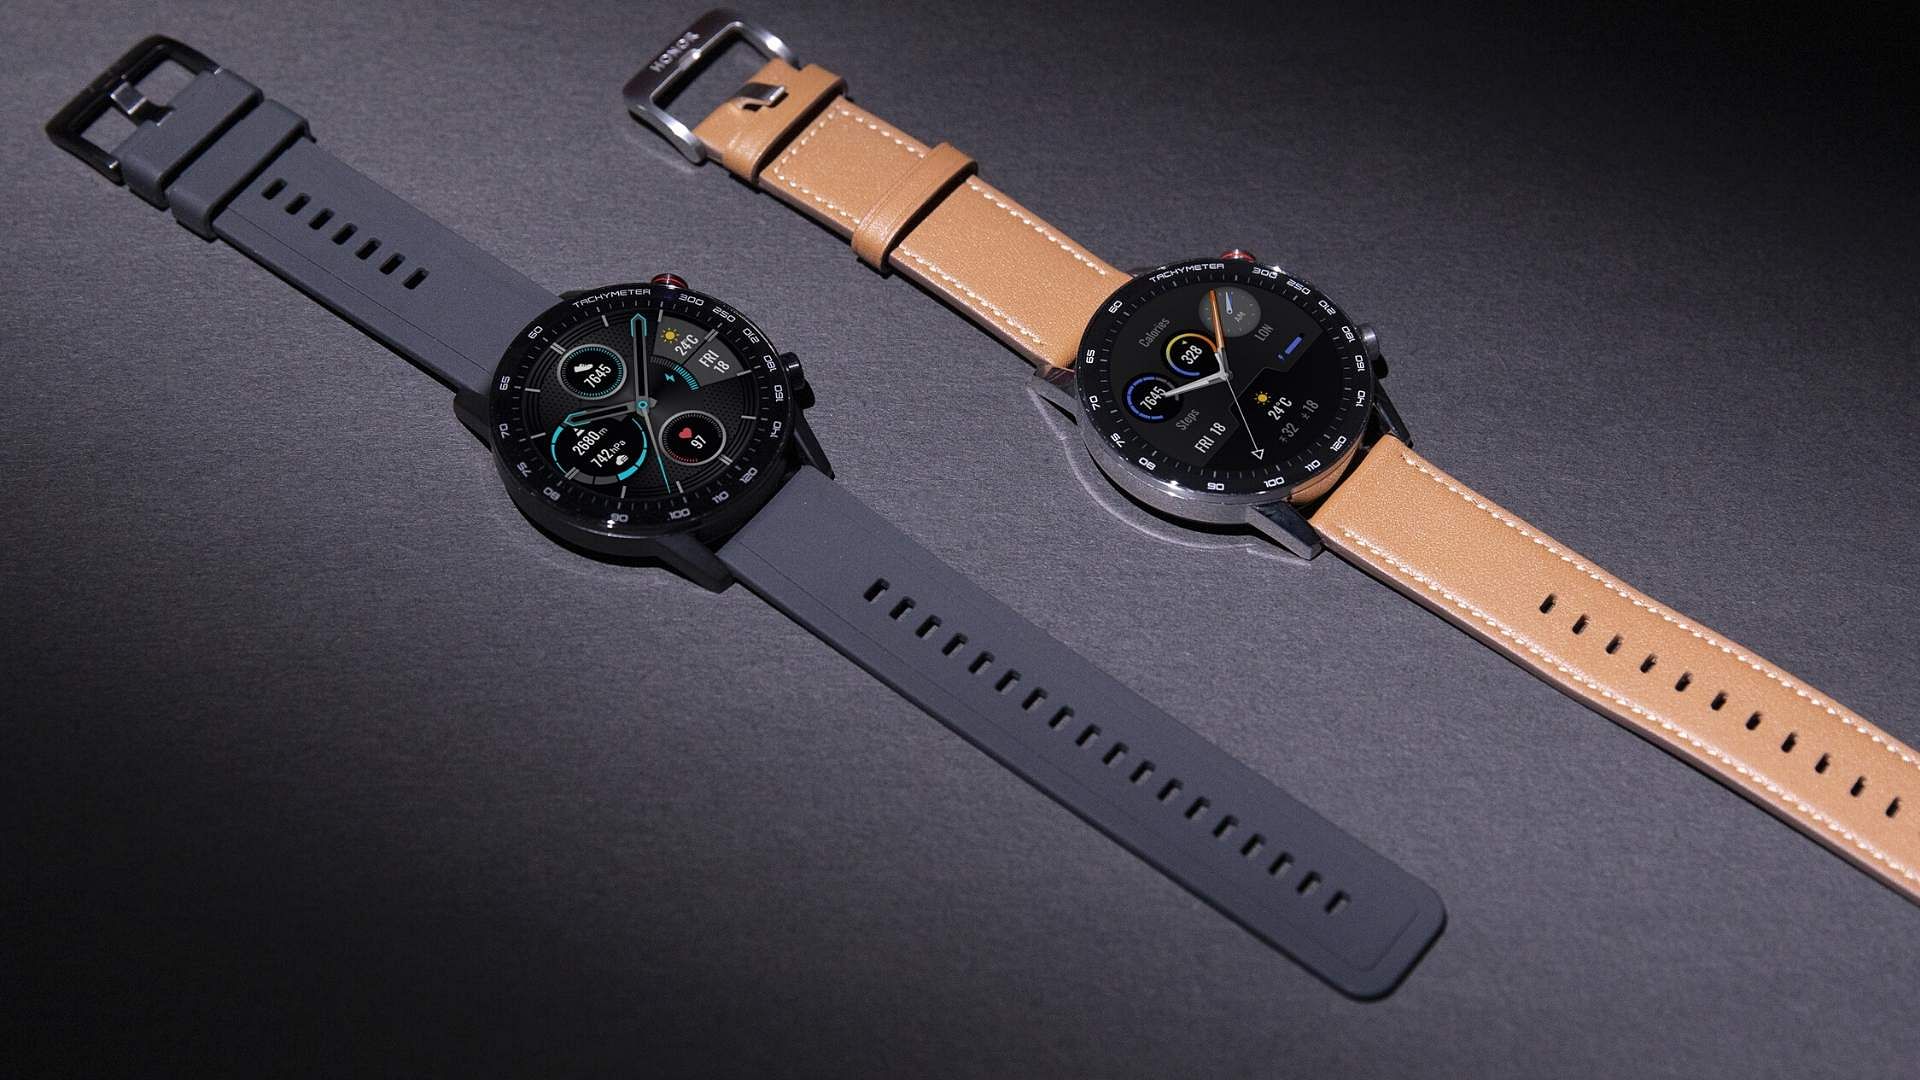 The HONOR MagicWatch 2 is just what you need for your stylish and fit lifestyle.